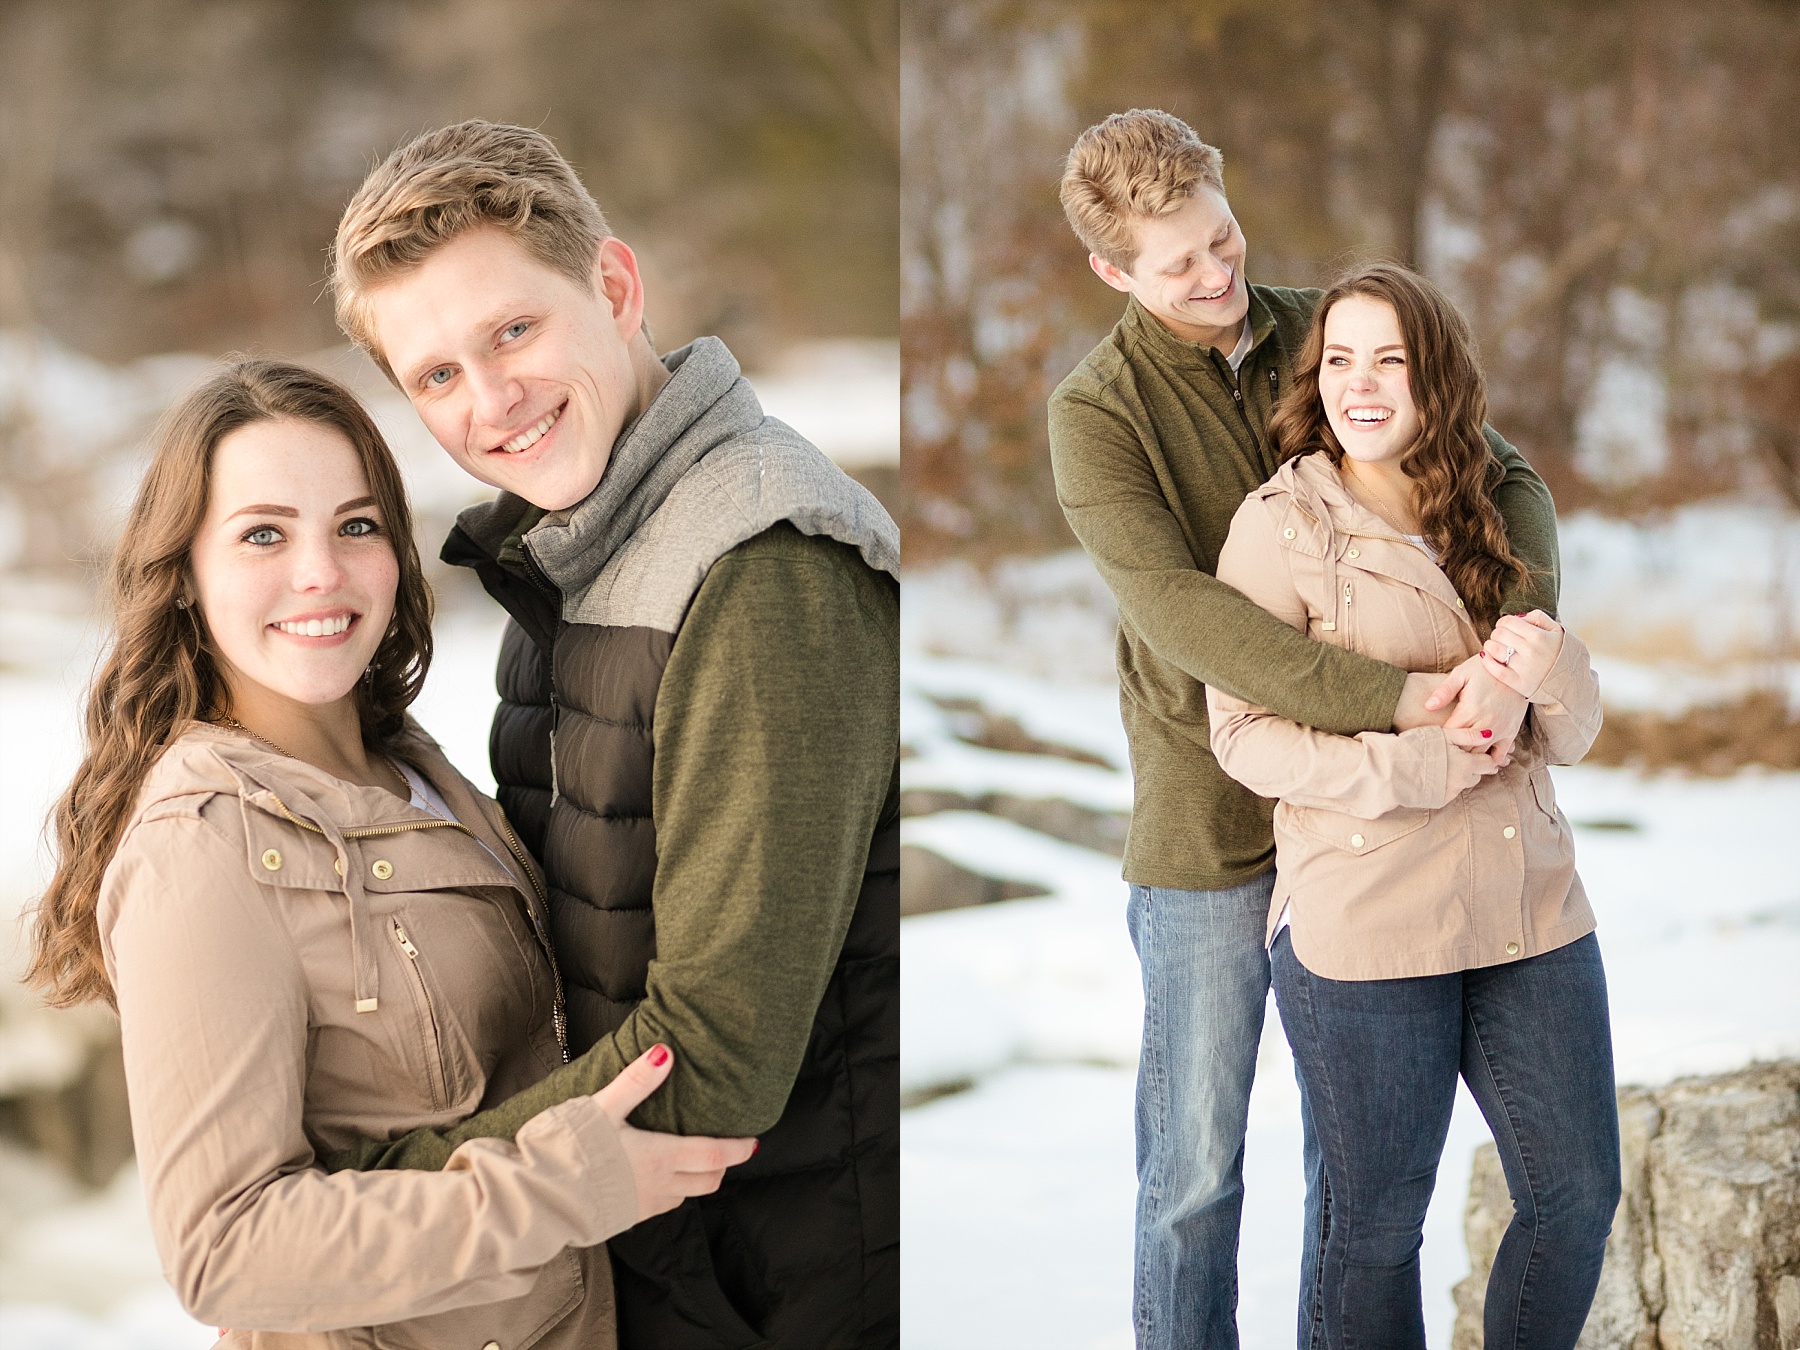 An ice cream date engagement session in the middle of winter was the perfect way to spend an afternoon with Haily & Seth.